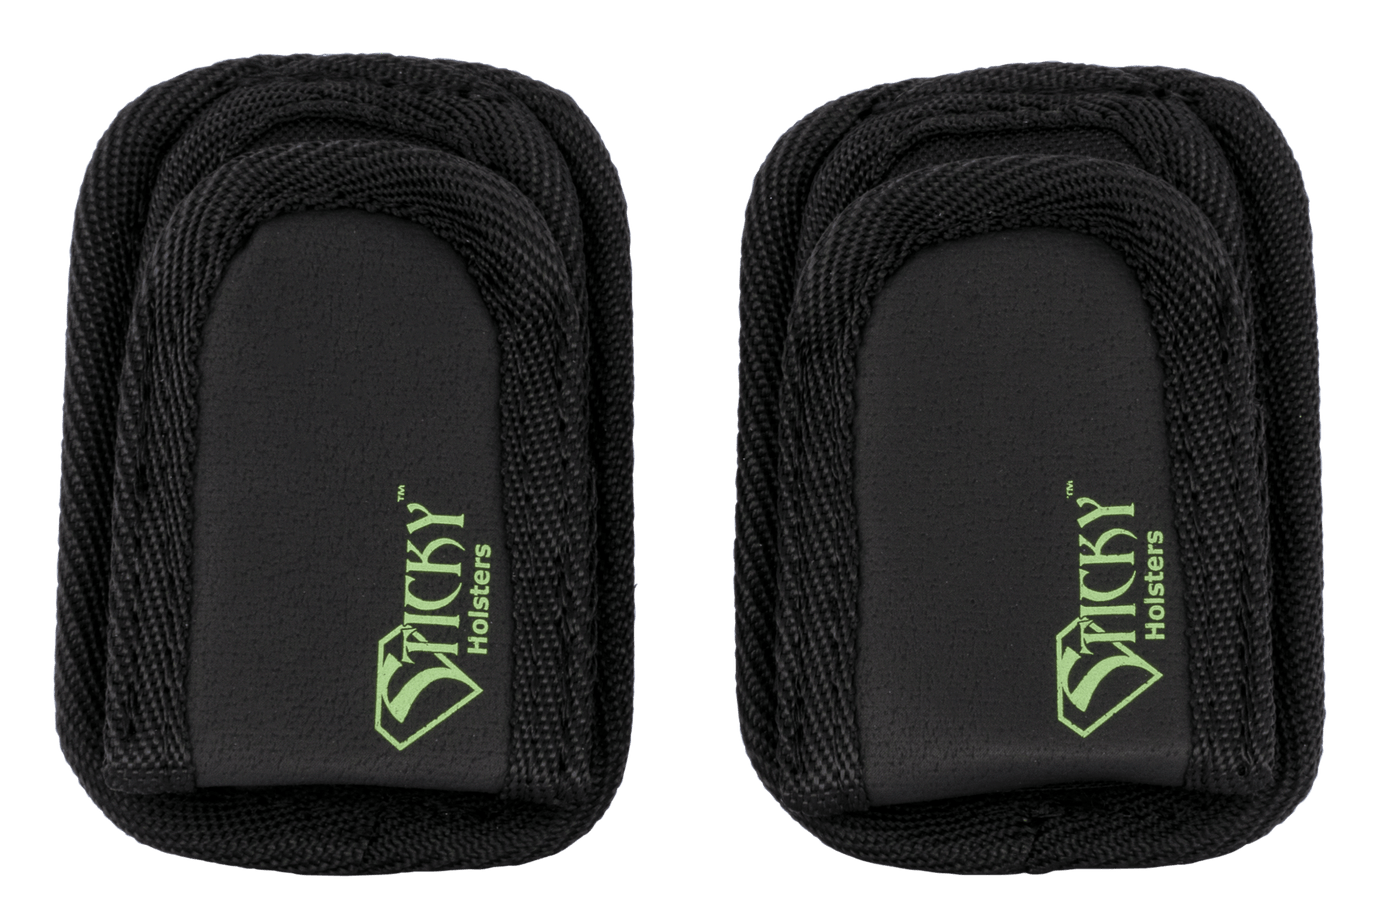 Sticky Holsters Sticky Holster Mini Mag Pouch - 2-pack< Holsters And Related Items